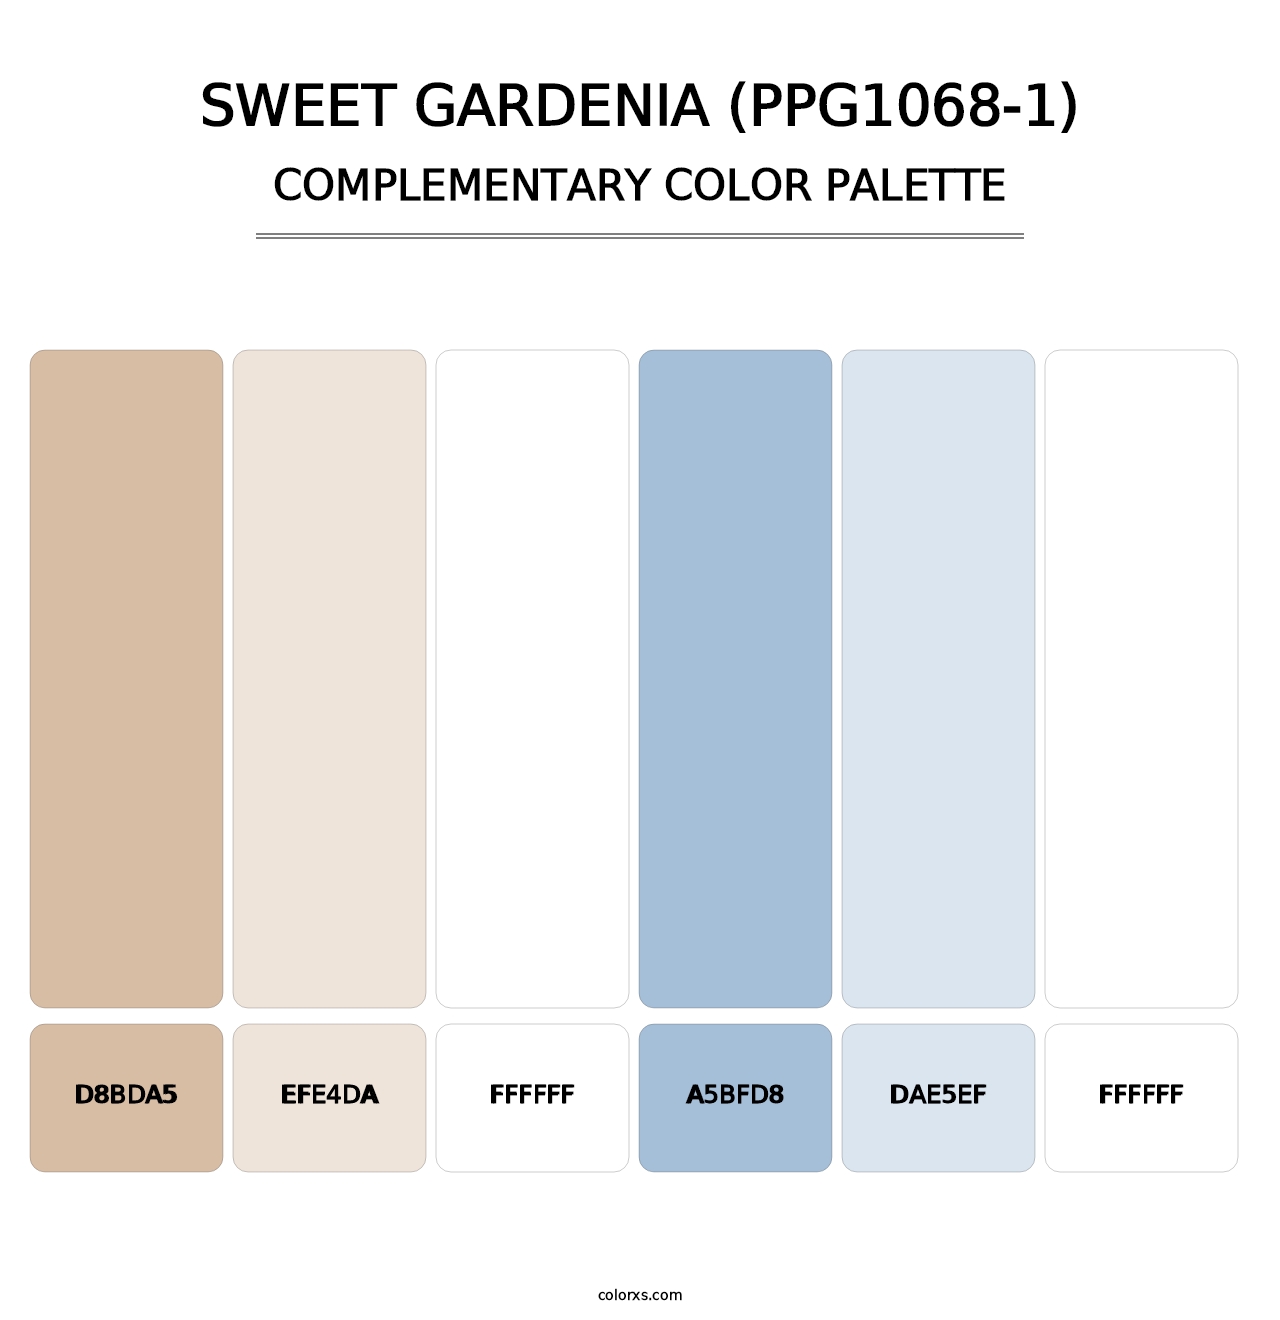 Sweet Gardenia (PPG1068-1) - Complementary Color Palette